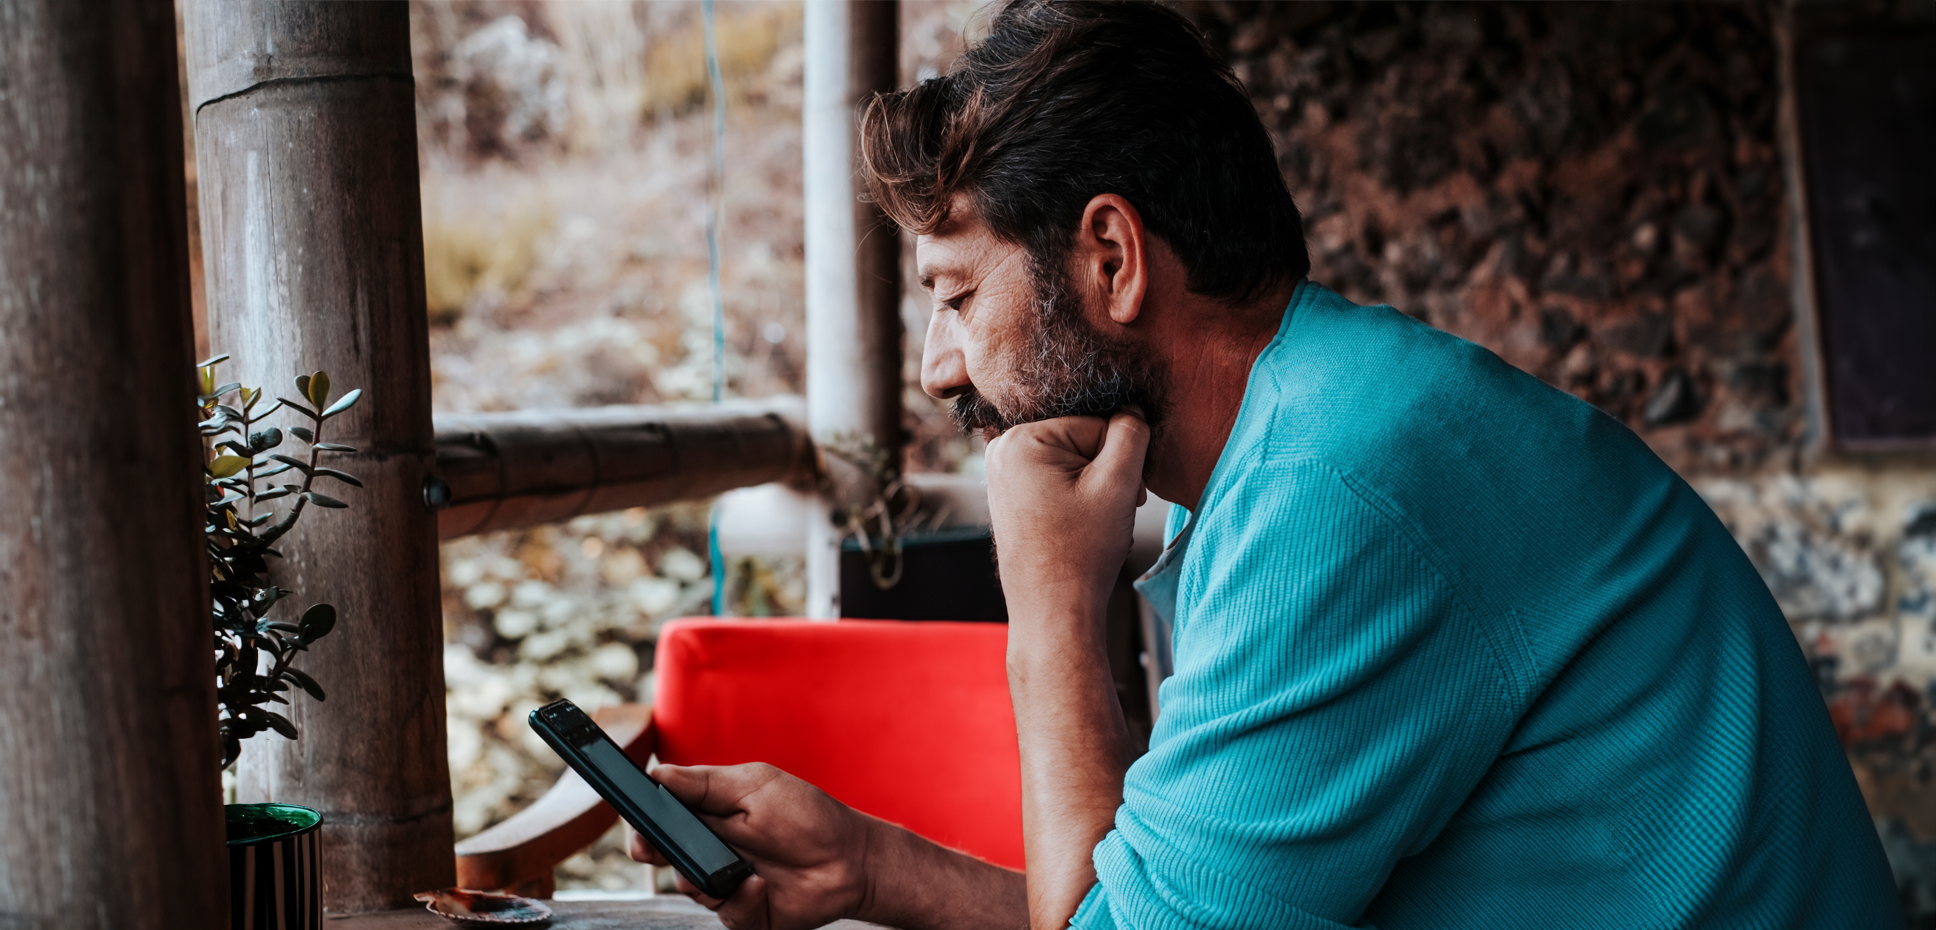 A man with brown hair and a beard looks at his mobile phone while sitting in a porch